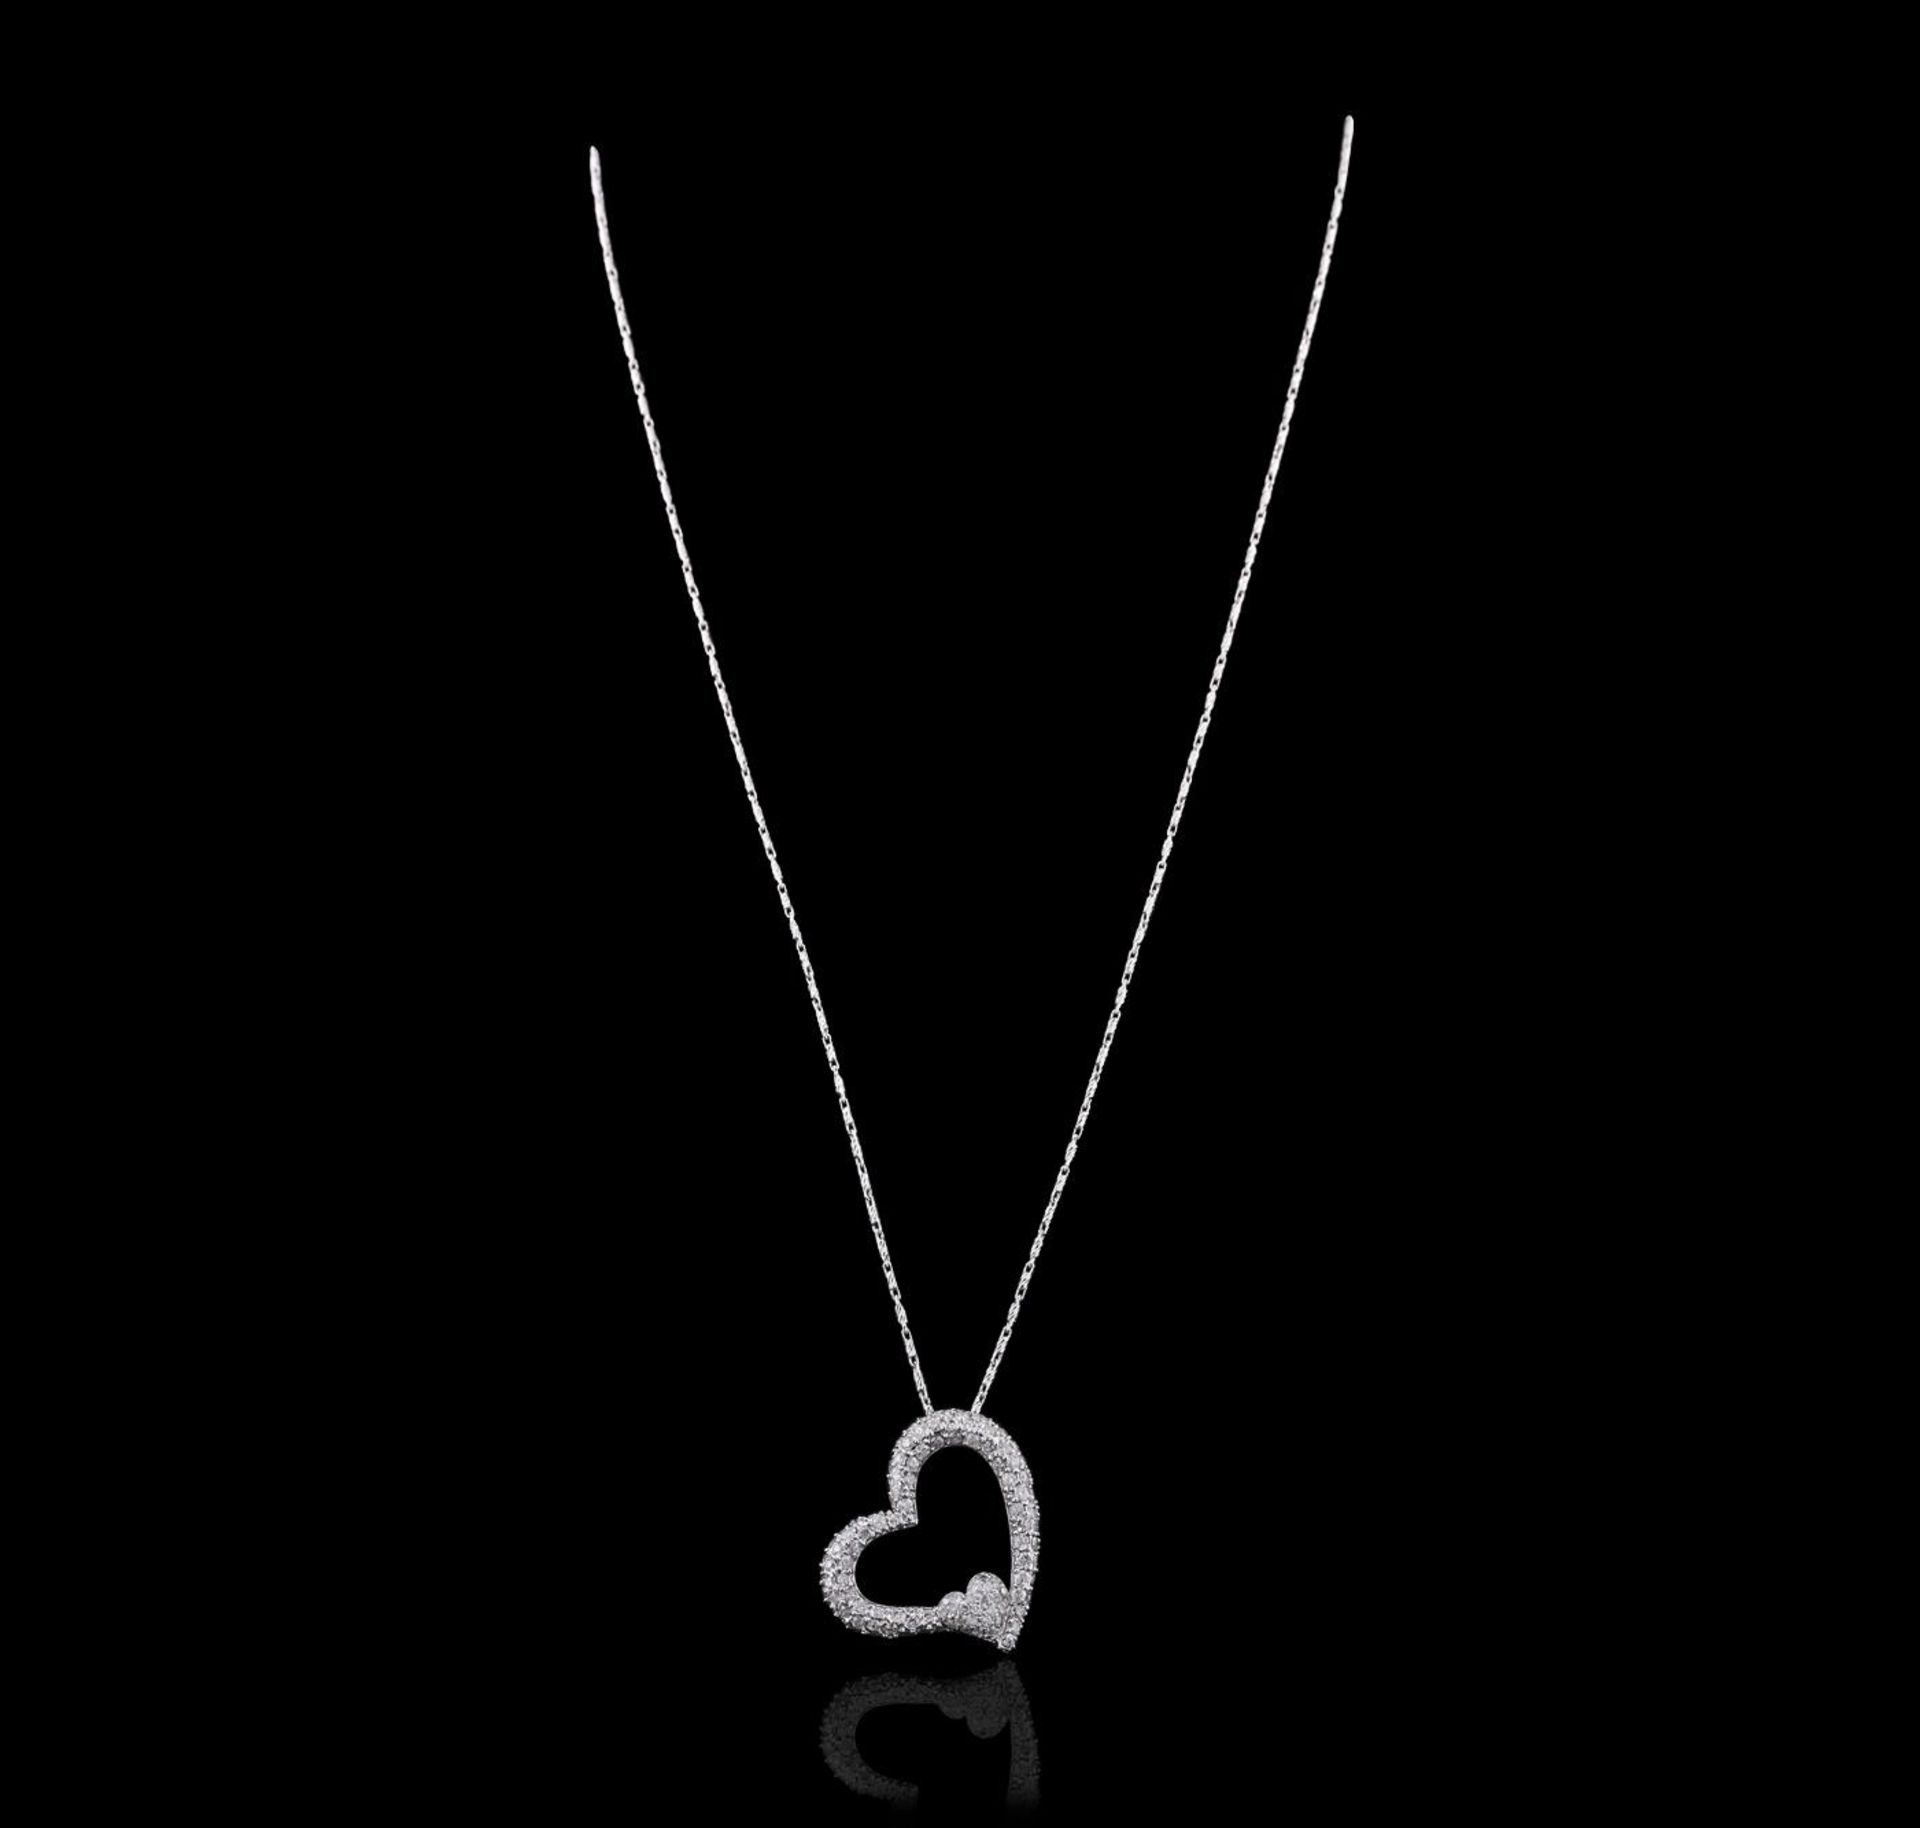 14KT White Gold 1.35 ctw Diamond Pendant With Chain - Image 2 of 3